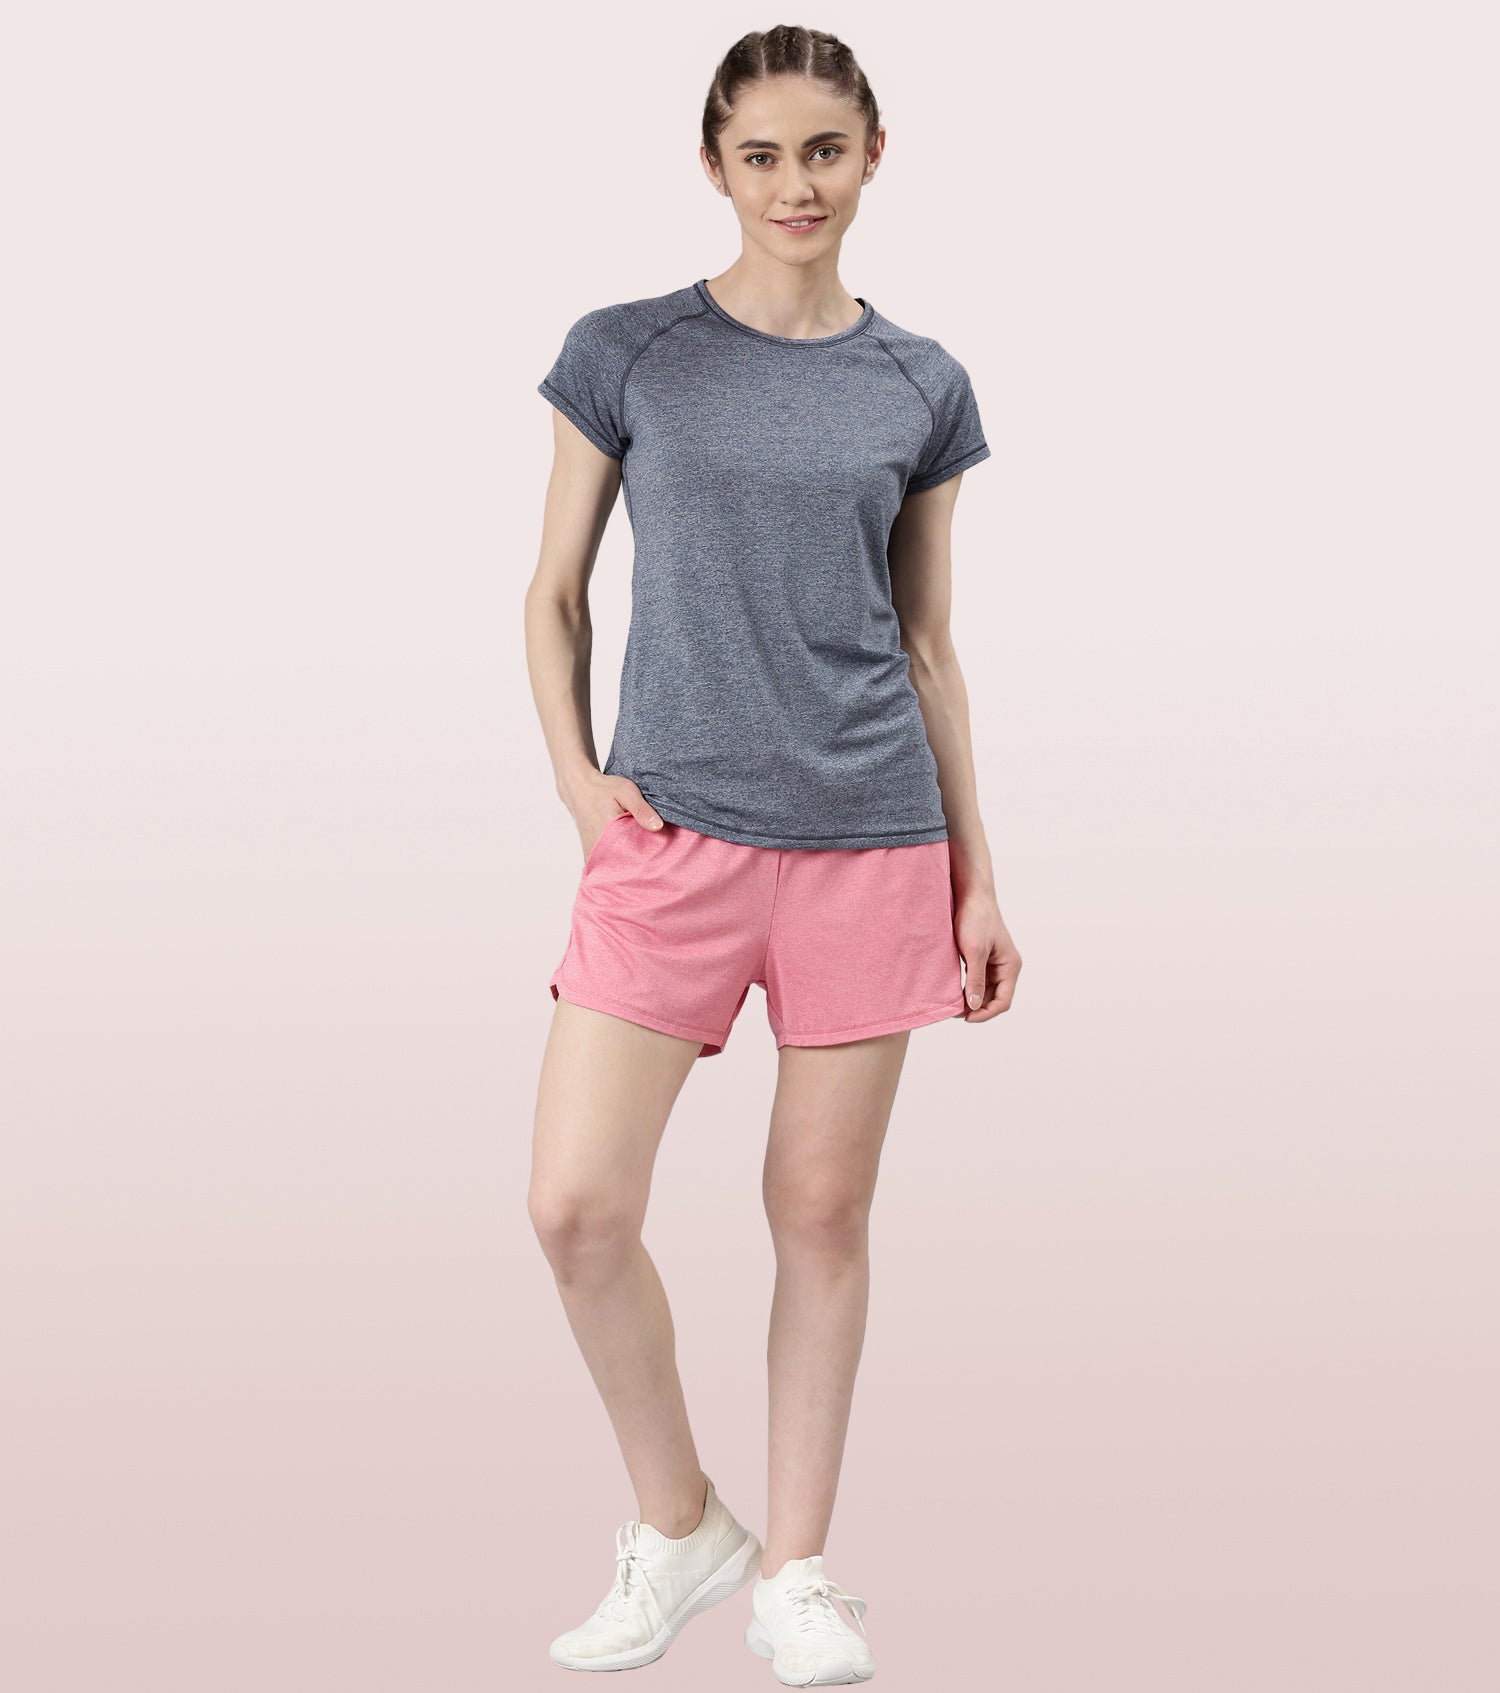 Athleisure- A704
BASIC WORKOUT SHORTS | DRY FIT WORKOUT SHORTS
RELAXED FIT | MID RISE | THIGH LENGTH